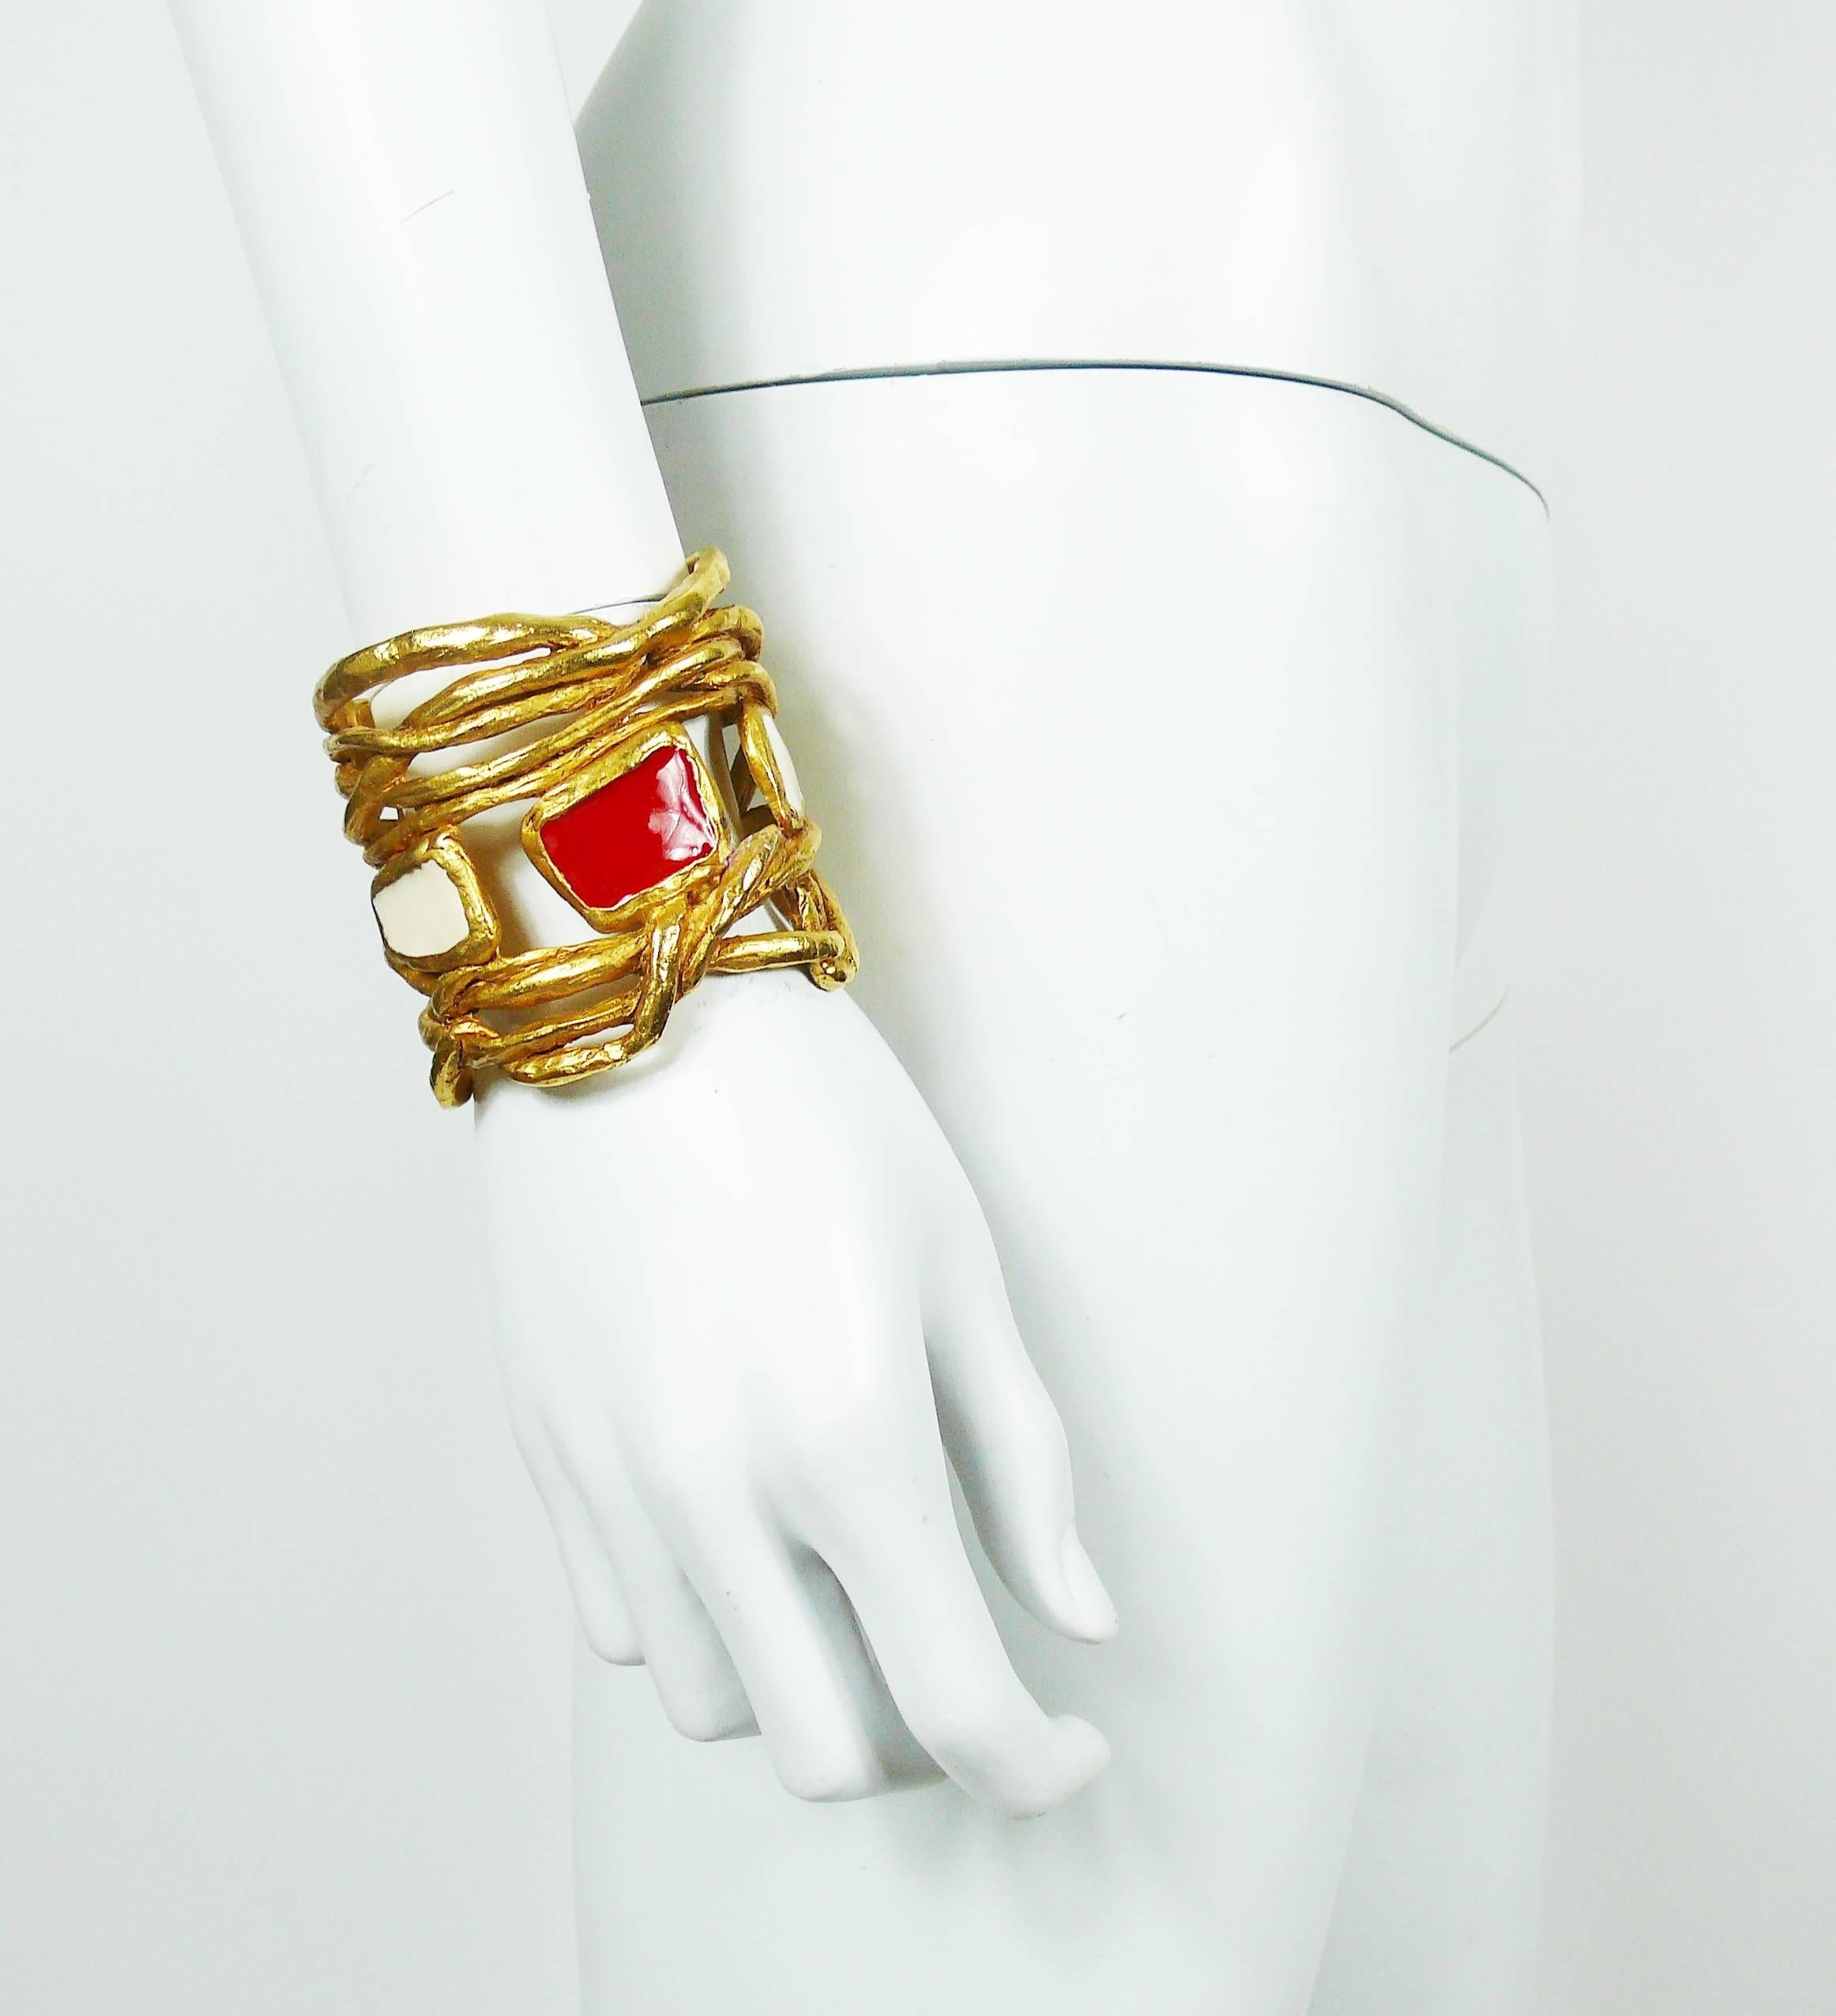 CHRISTIAN LACROIX vintage antiqued gold tone wired cuff bracelet featuring red and white enamel details.

Marked CHRISTIAN LACROIX CL Made in France.

Indicative measurements : inner circumference approx. 18.54 cm (7.30 inches) / max. width approx.